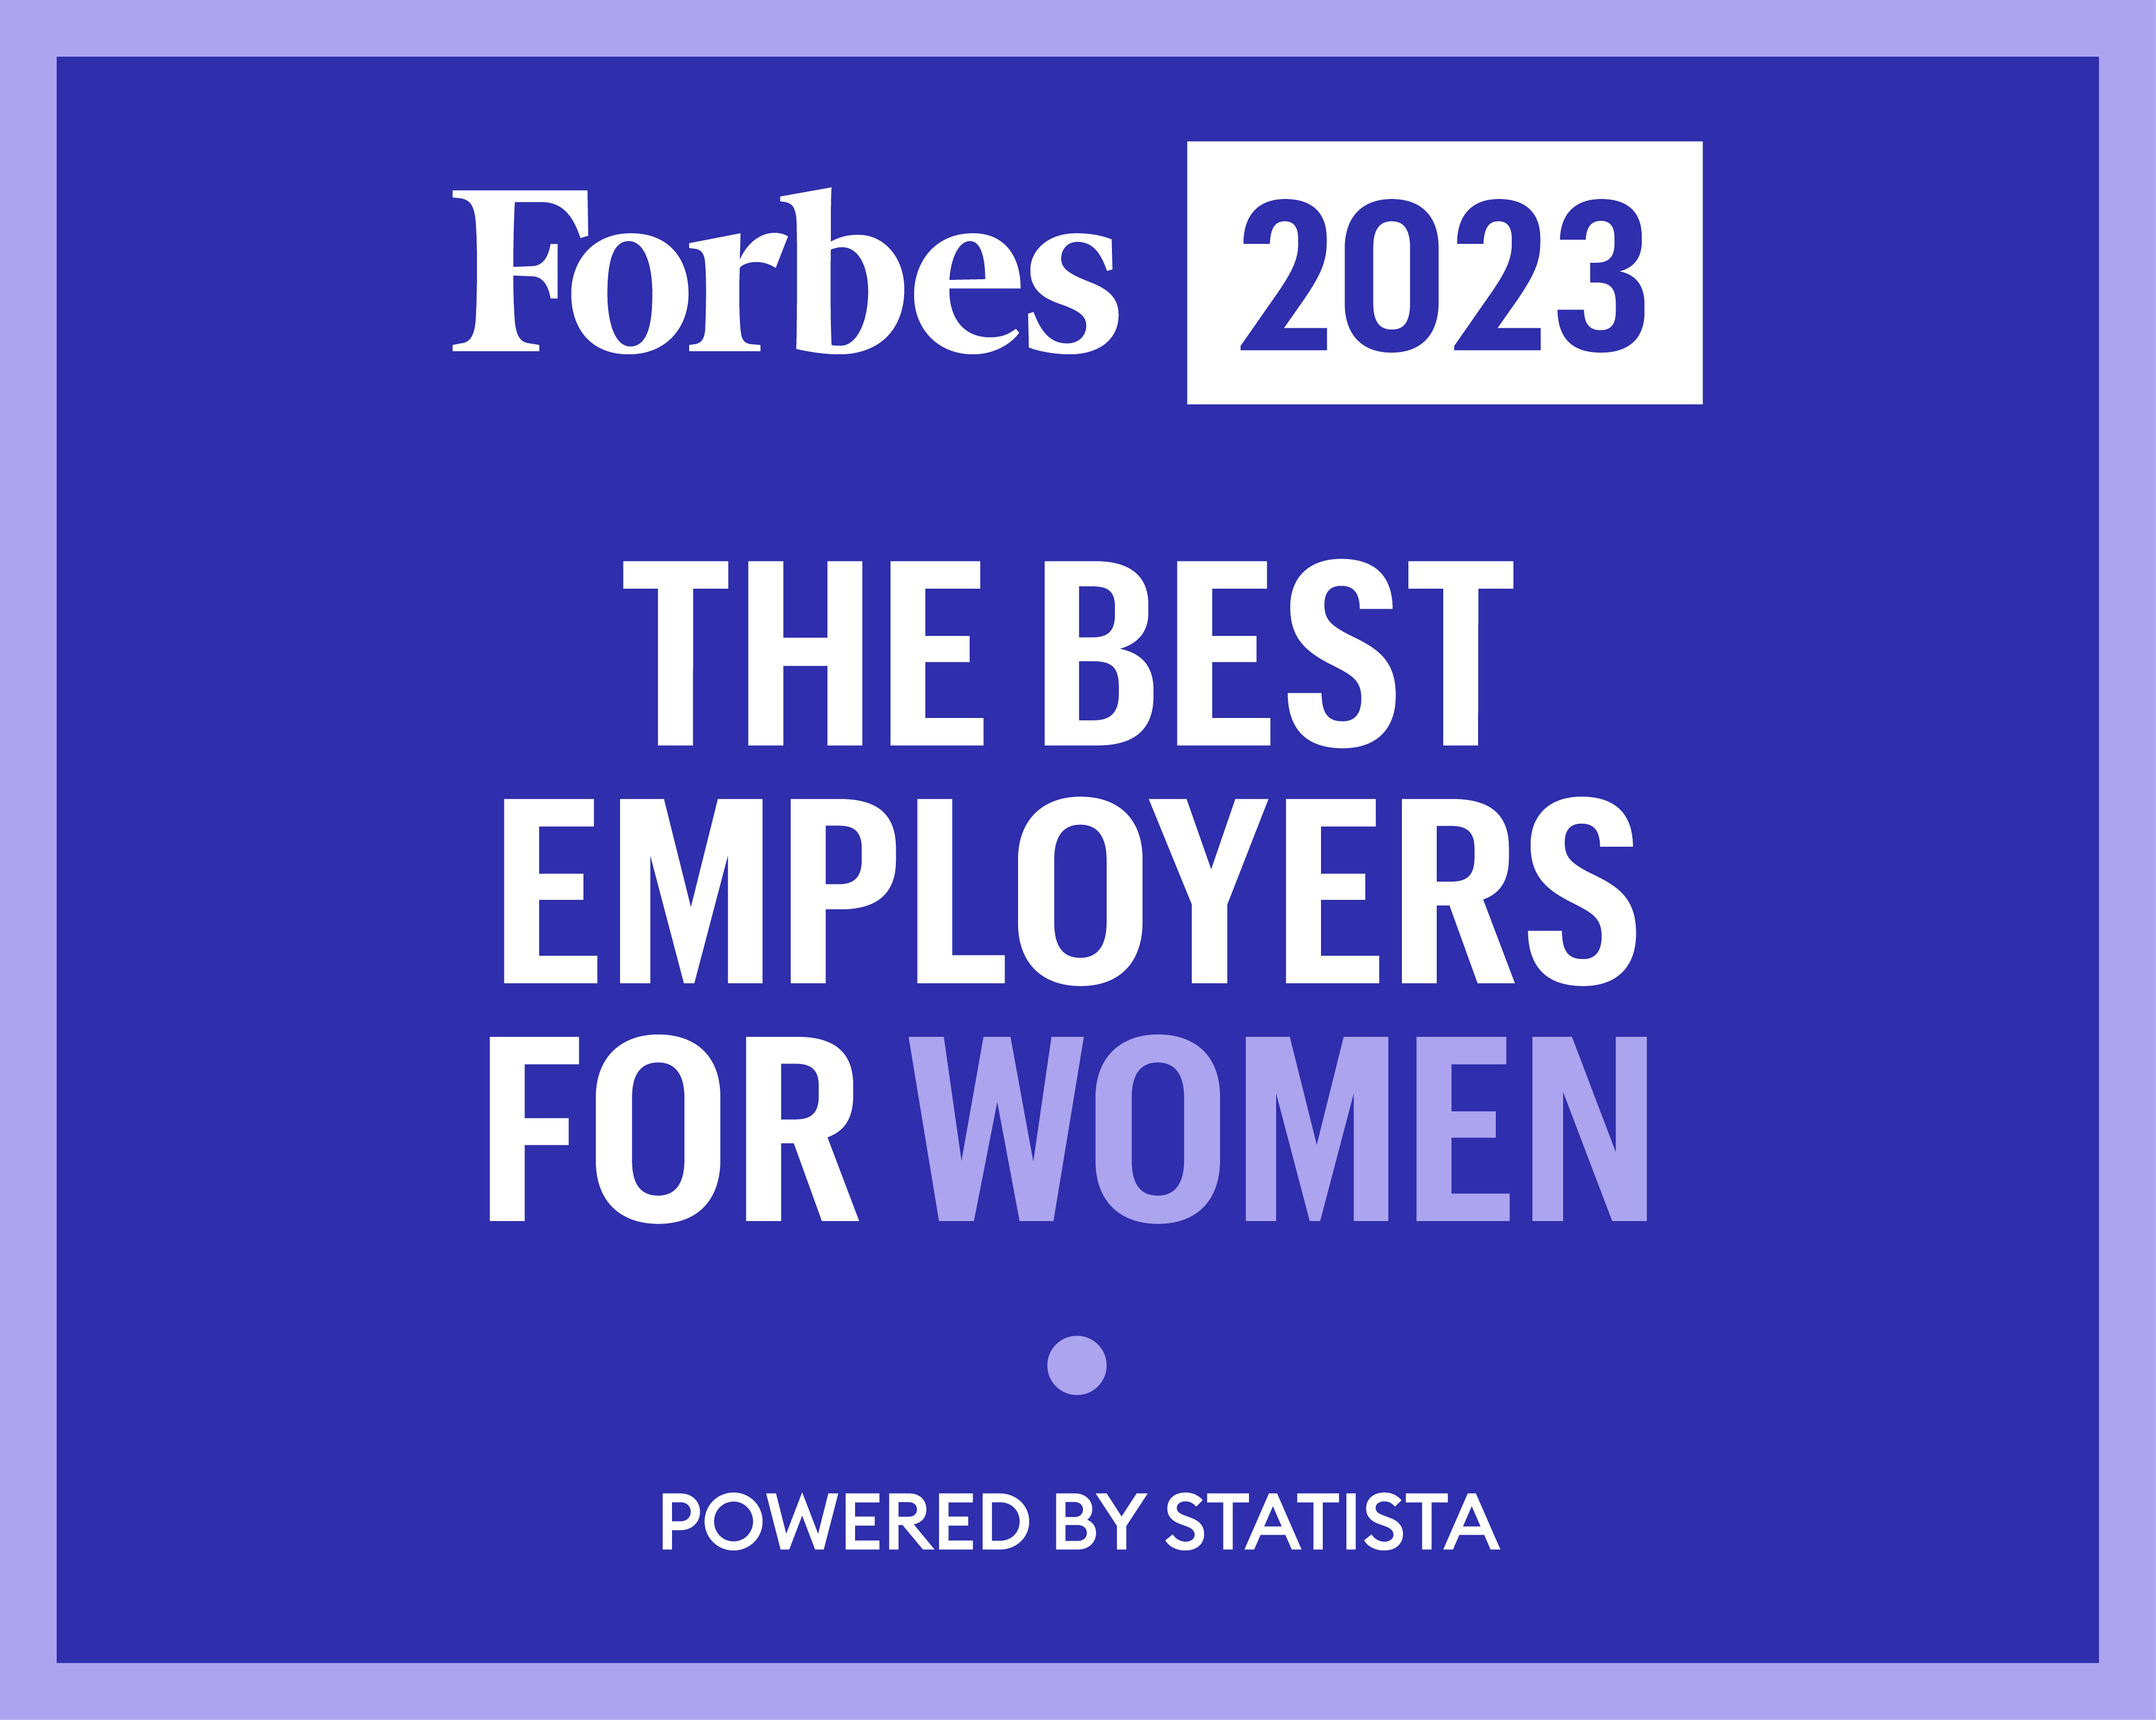 MD Anderson award - Forbes 2023 America's Best Women Employers